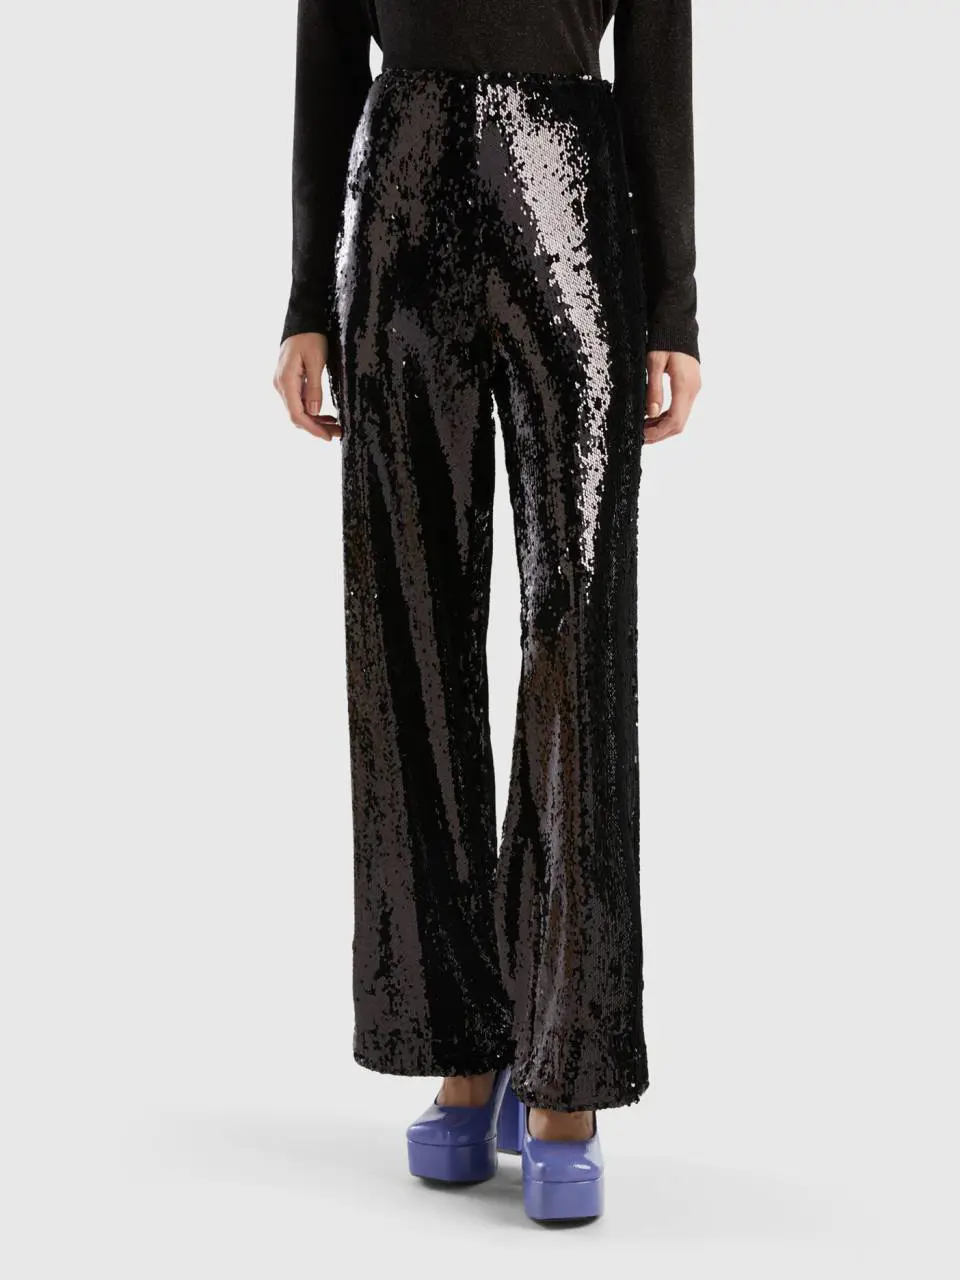 Benetton pants with sequins. 1